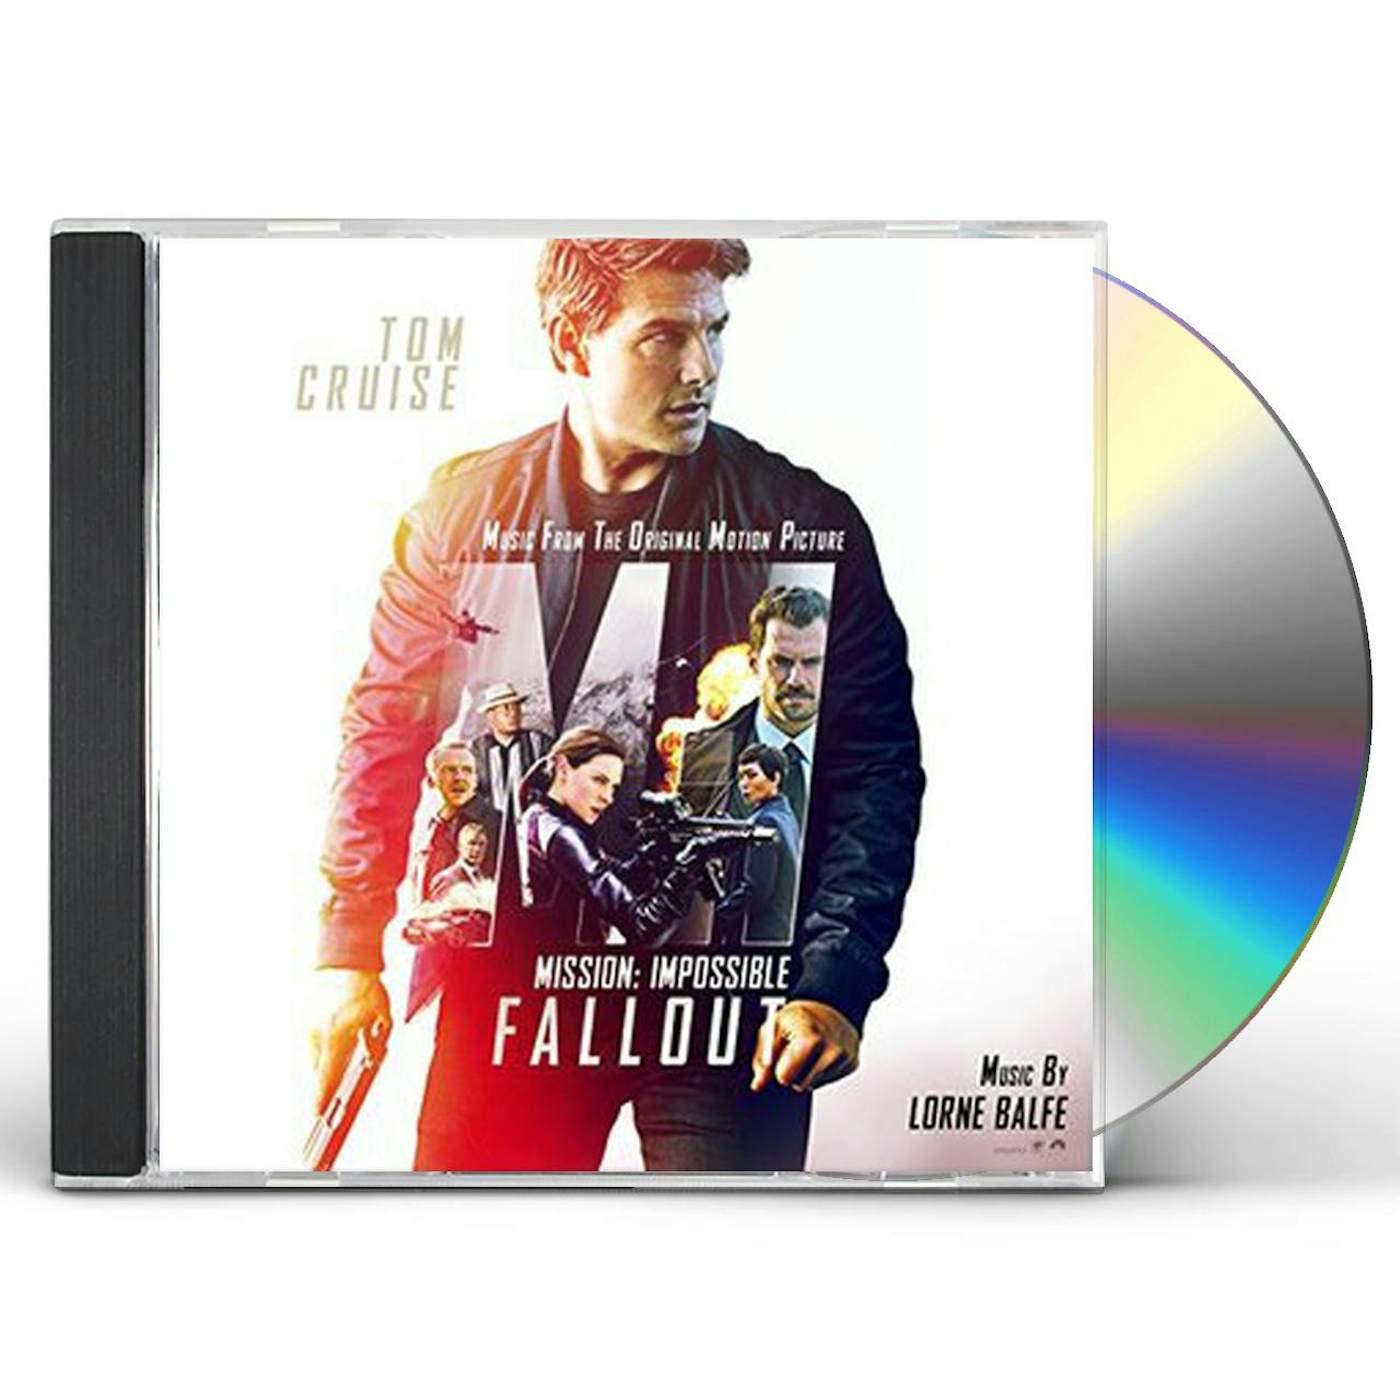 Lorne Balfe MISSION IMPOSSIBLE: FALLOUT (2CD) CD